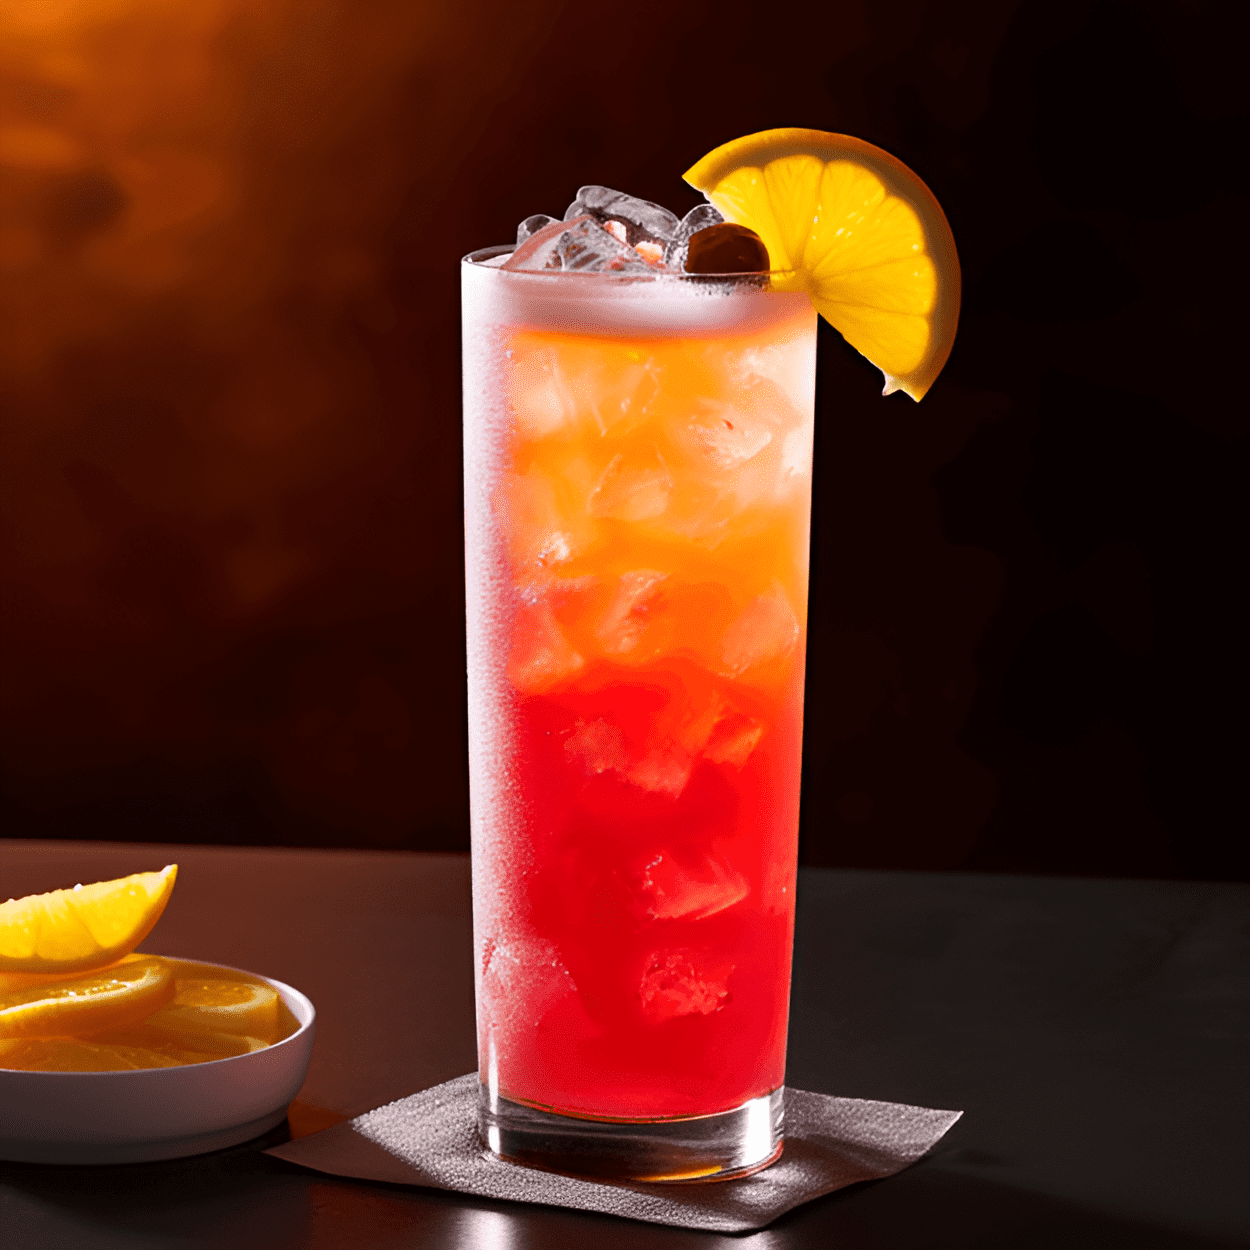 Firefly Cocktail Recipe - The Firefly cocktail is a delightful blend of sweet, sour, and slightly bitter flavors. The sweetness of the grenadine is balanced by the tartness of the grapefruit juice, while the vodka adds a smooth, slightly fiery kick. It's a refreshing, fruity, and slightly tangy cocktail with a vibrant taste.